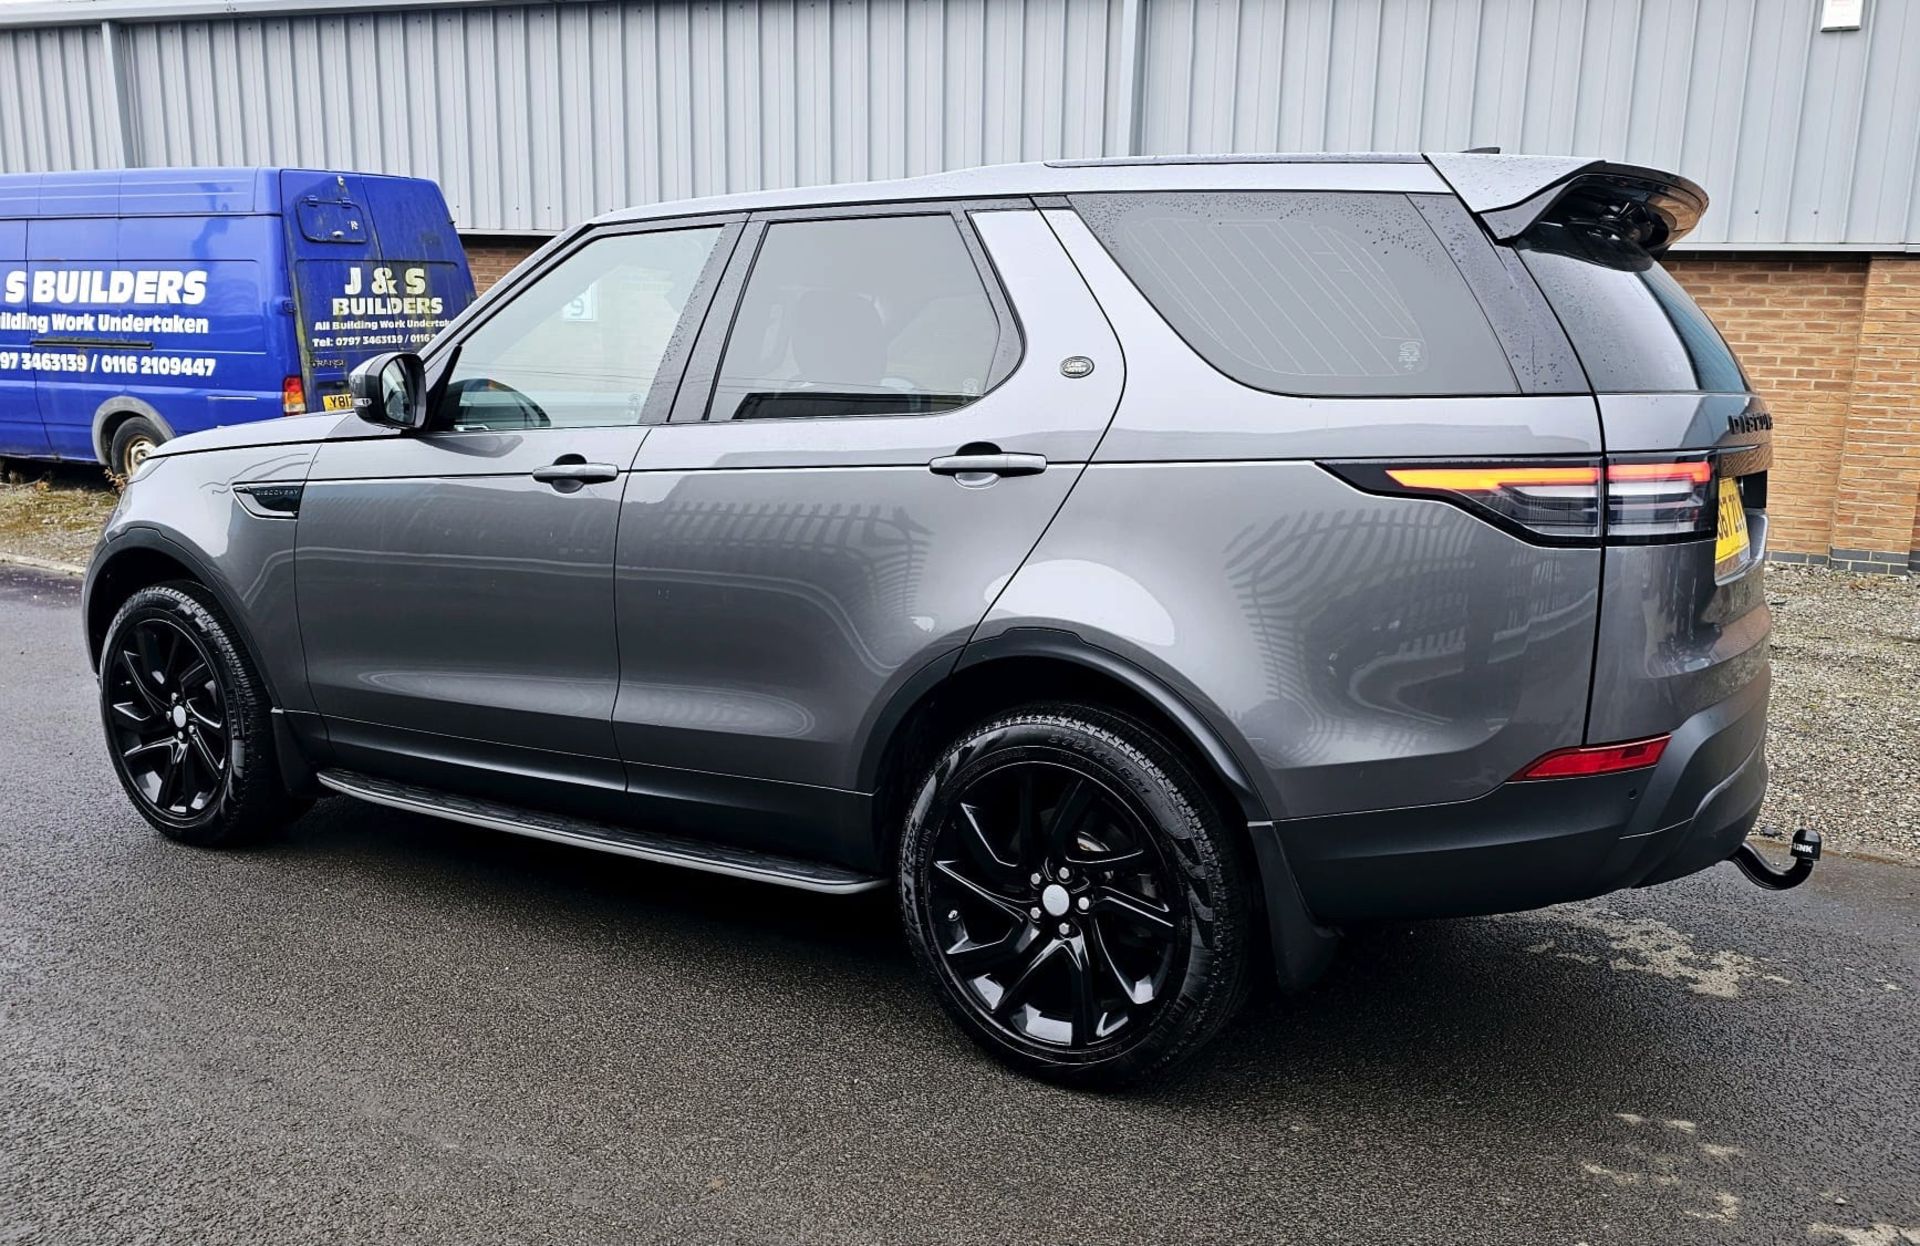 Land Rover Discovery 5 - (New Model) Diesel Auto - 2018 Model - Black Pack Edition - Sat Nav - Look - Image 10 of 45